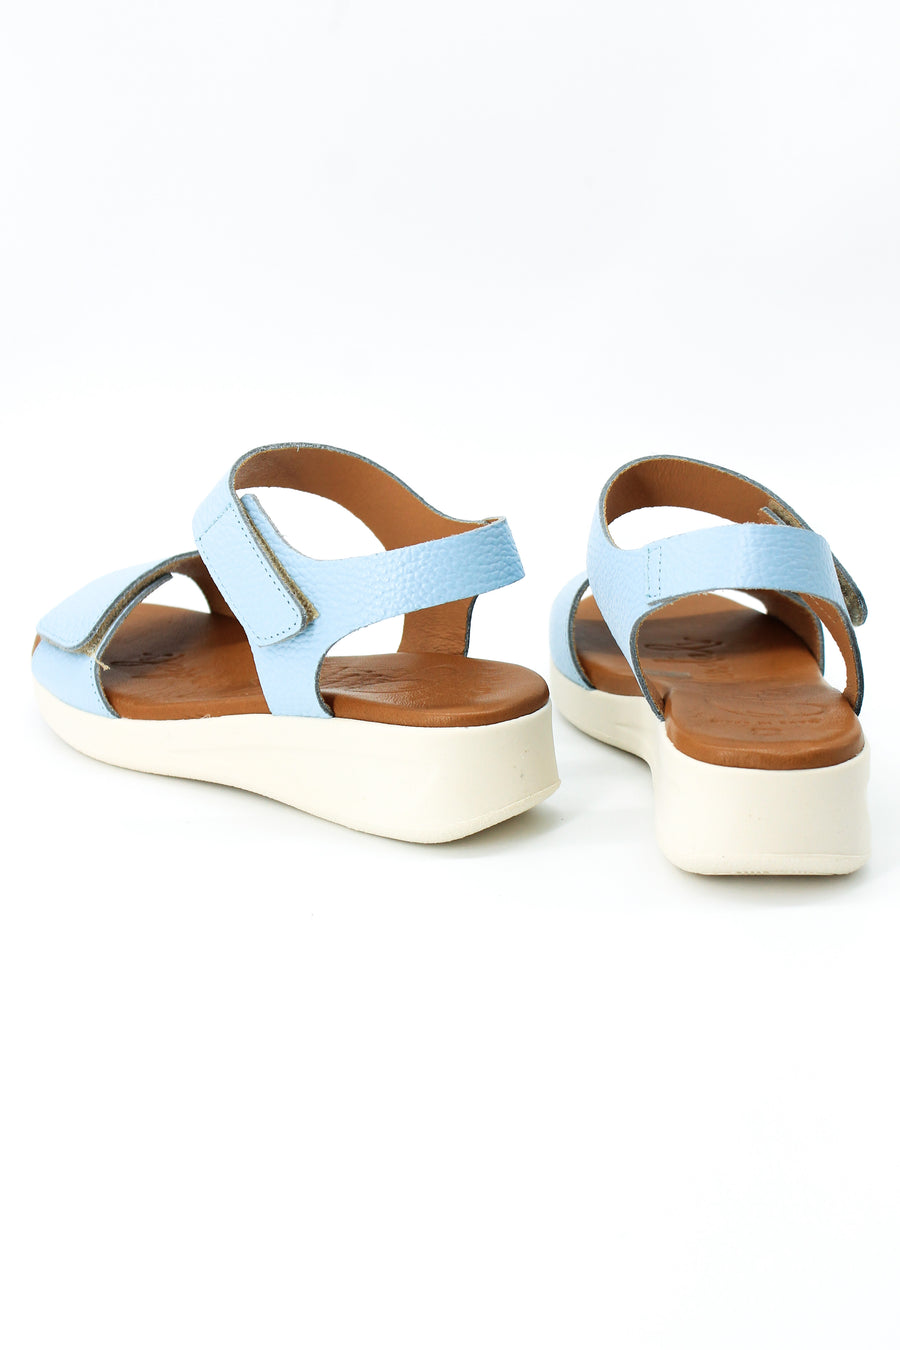 Oh My Sandals 5183 Blue